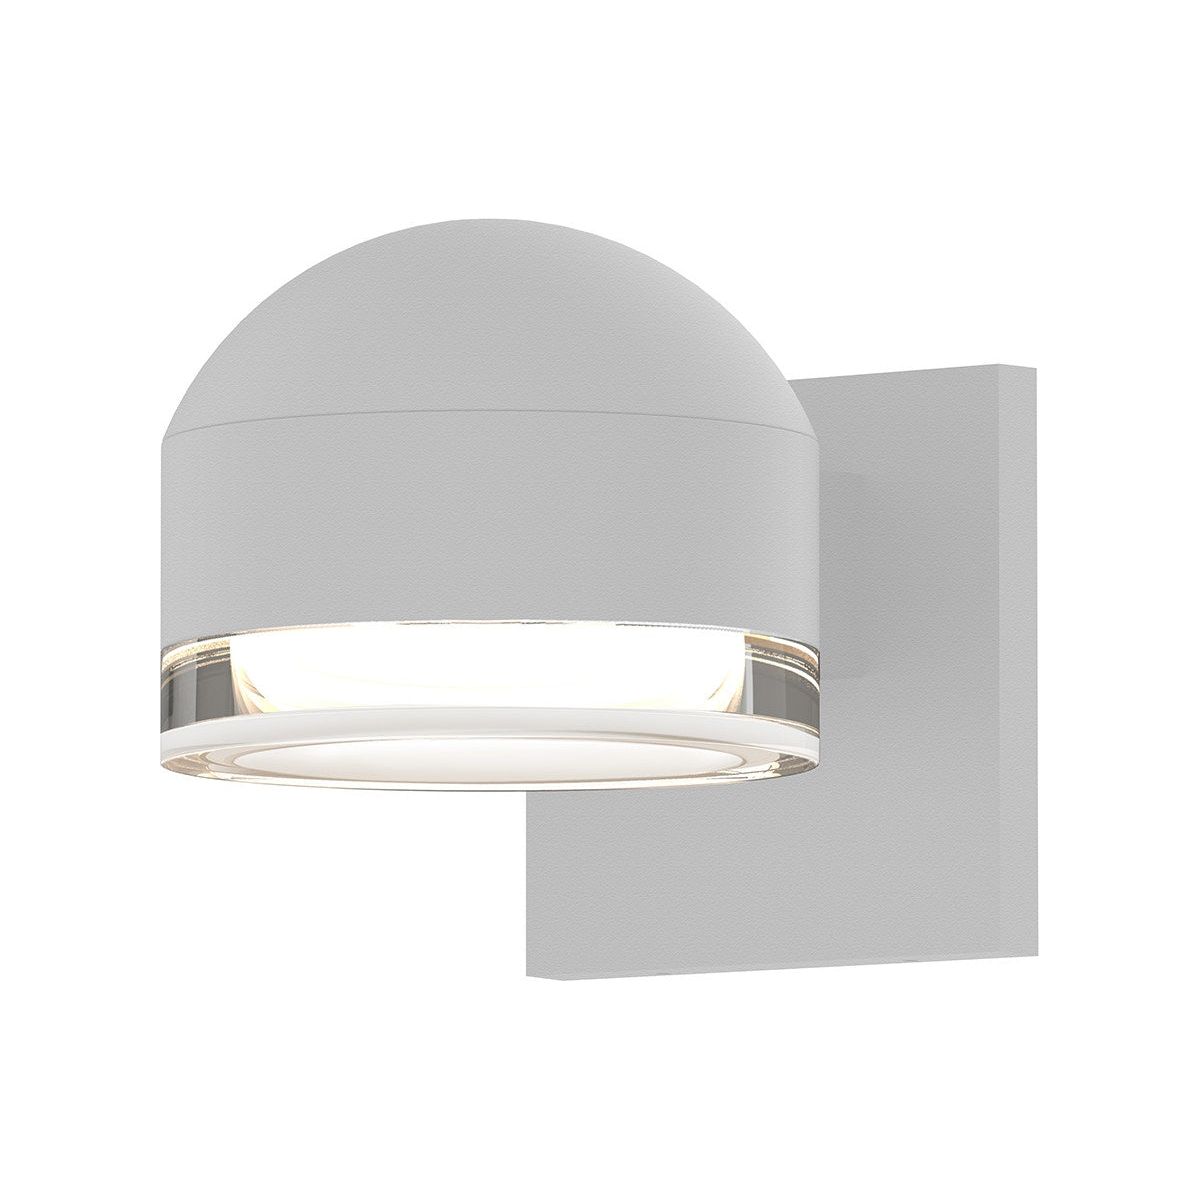 REALS Downlight LED Sconce with Dome Cap and Cylinder Lens